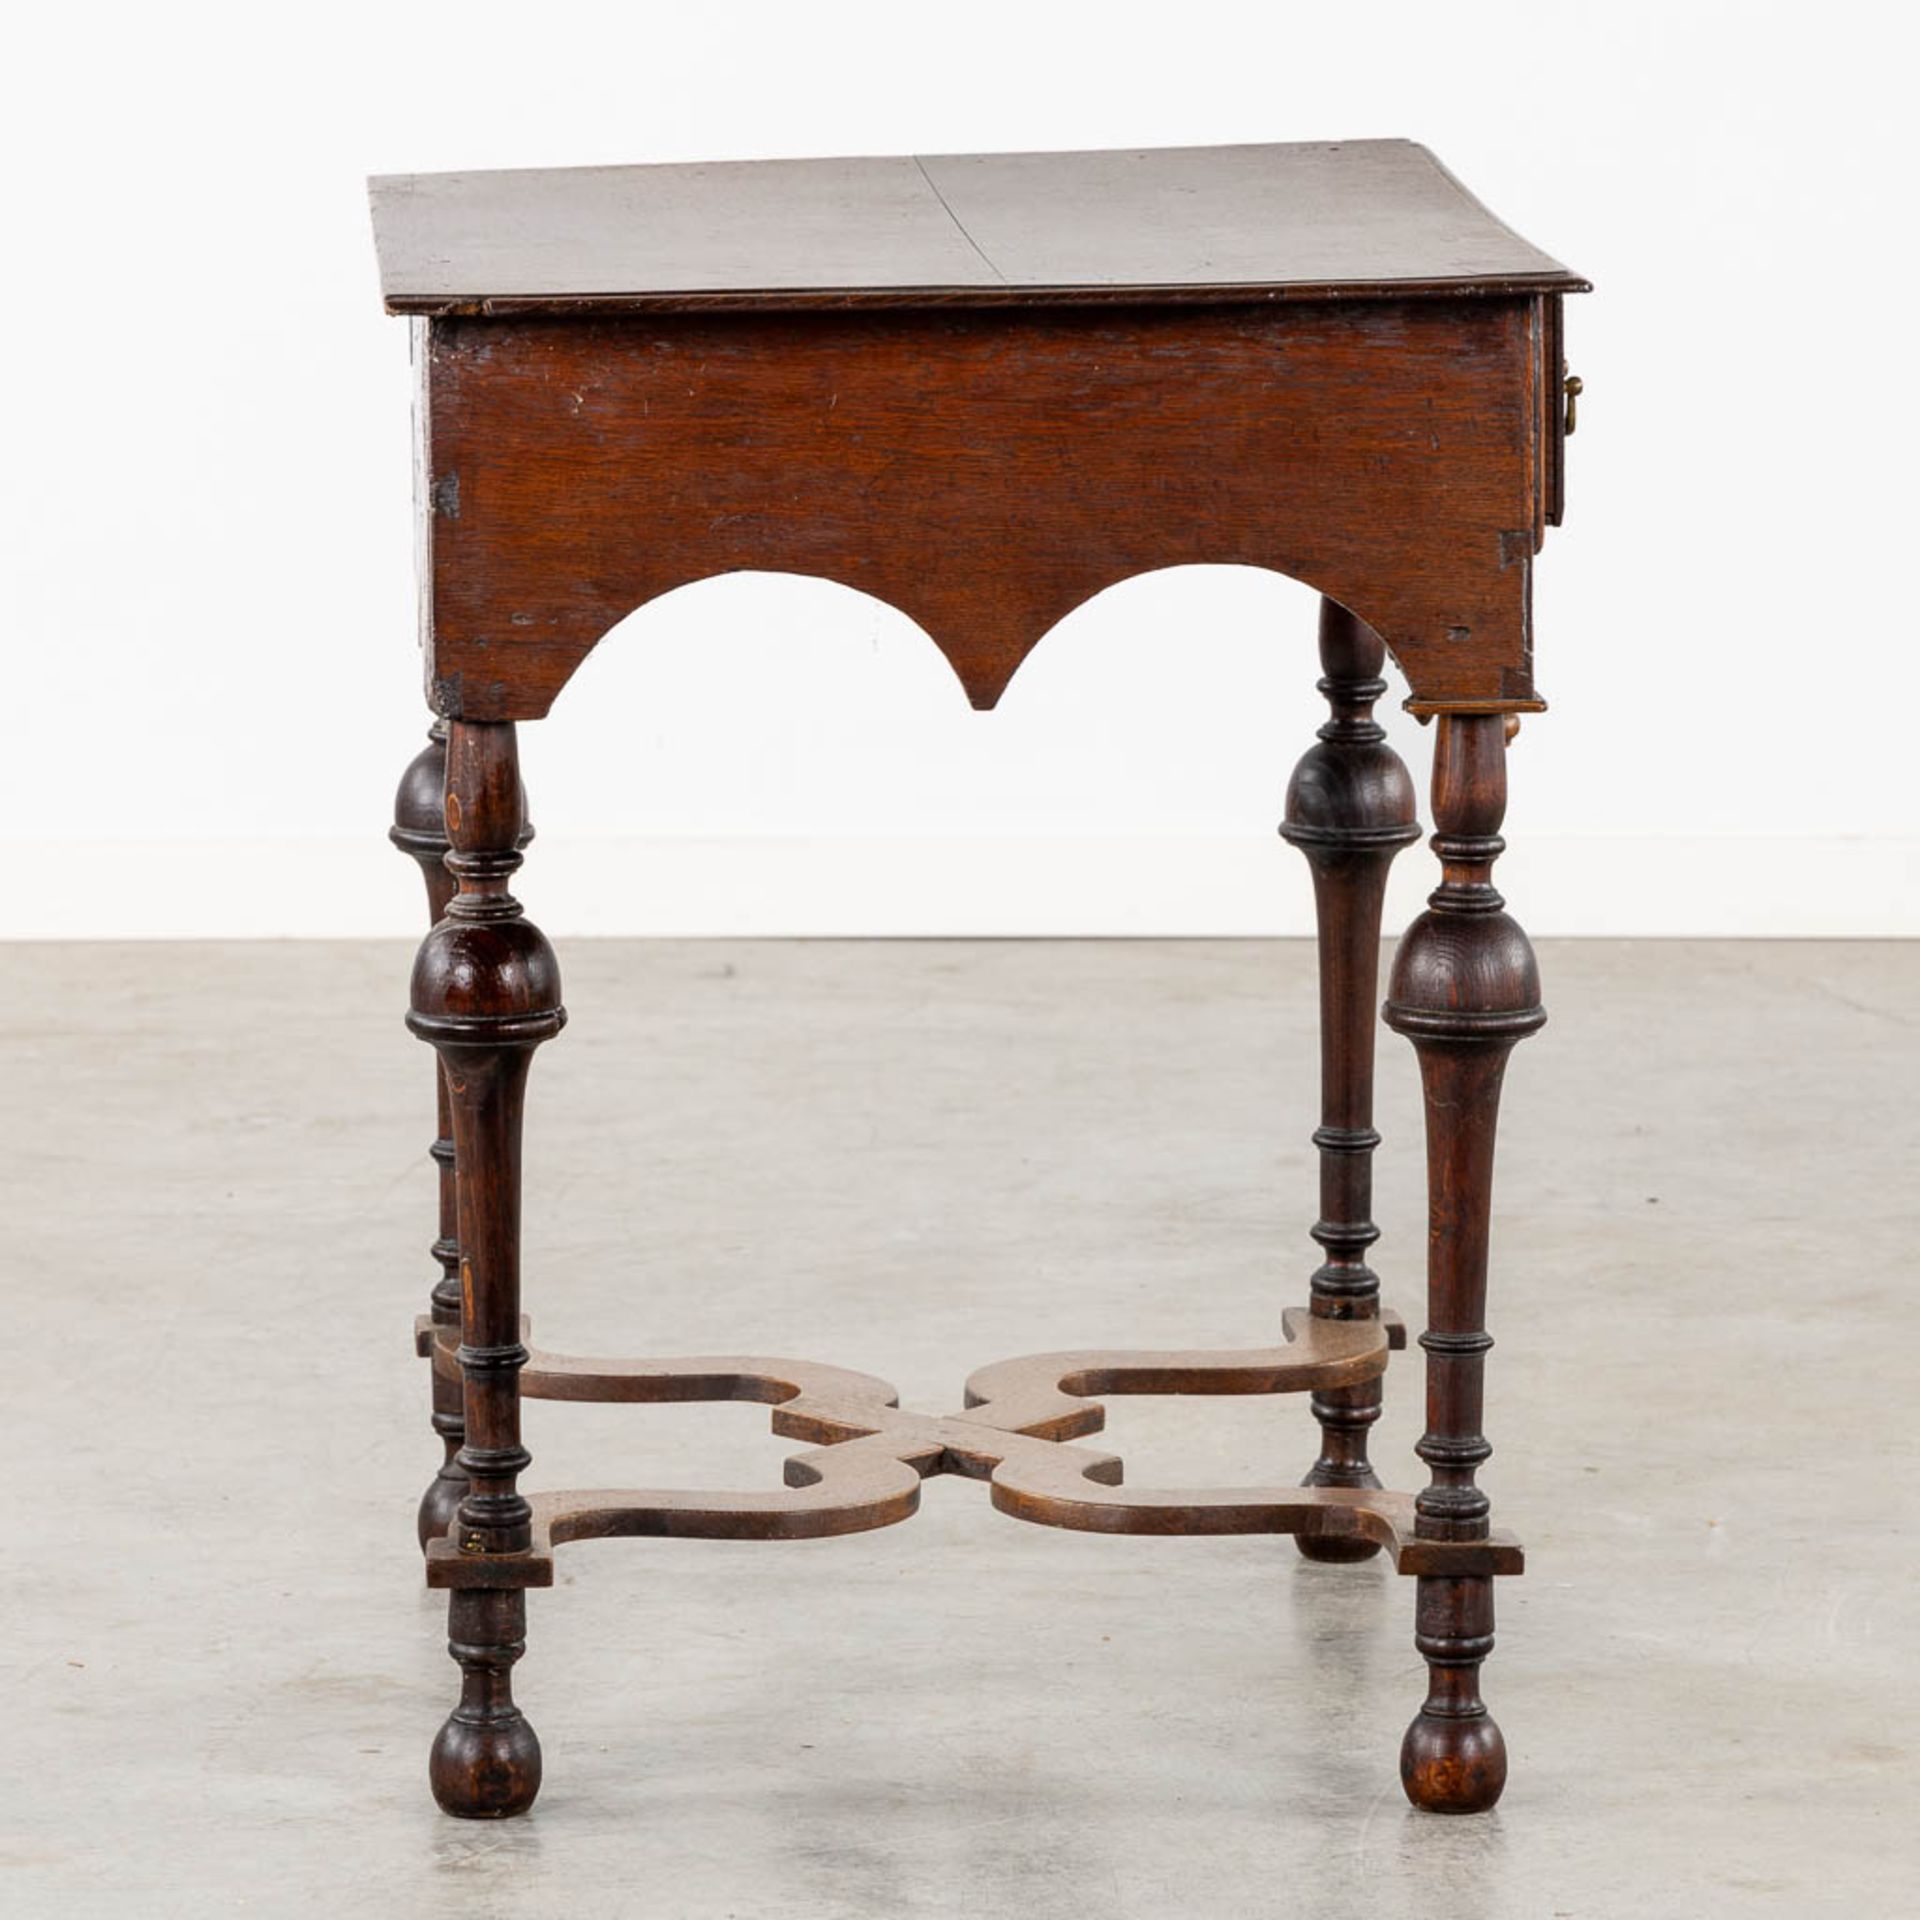 An antique oak 'Pay Table', The Netherlands, 18th C. (L:53 x W:69 x H:70 cm) - Image 7 of 11